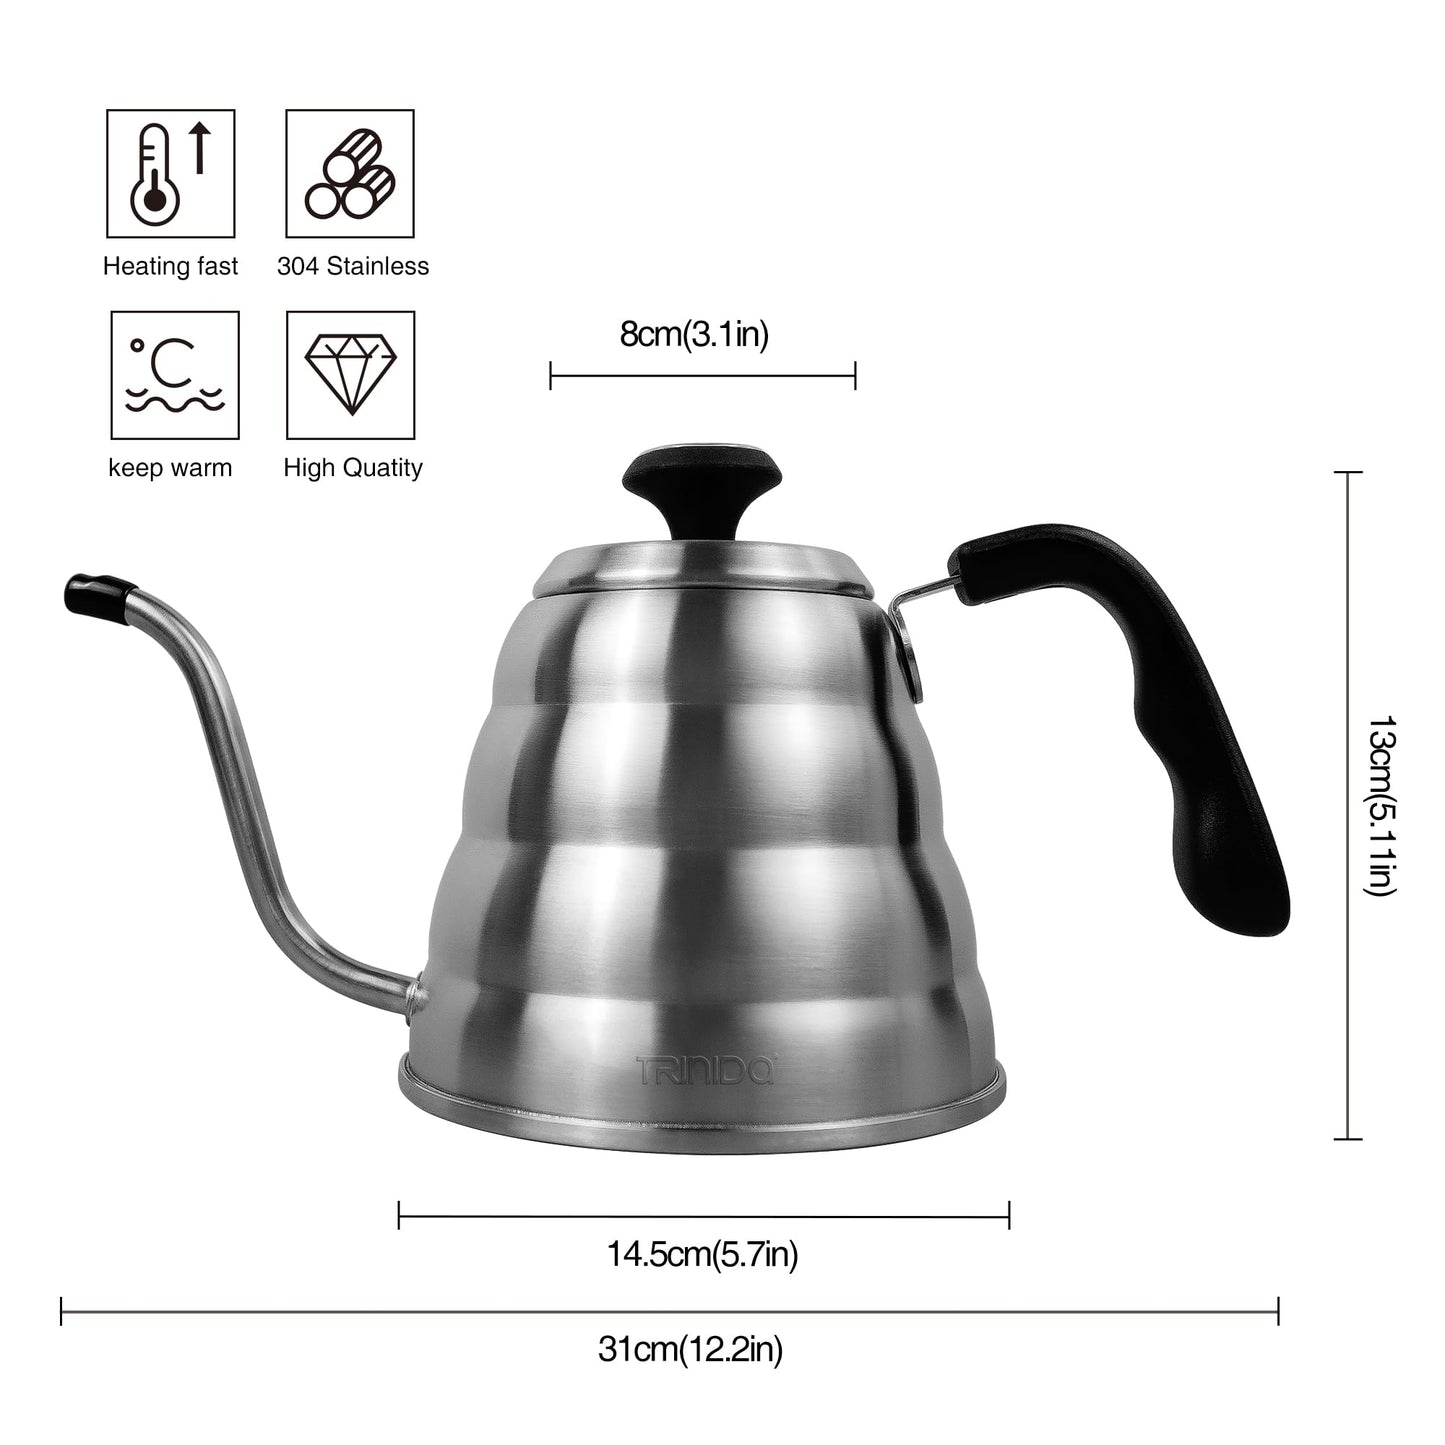 TRINIDa Gooseneck Kettle for Pour Over Coffee and Tea, 26 fl oz with Thermometer for Exact Temperature, Precision Pour Drip Spout, Stainless Steel, Compatible with all Stove Tops